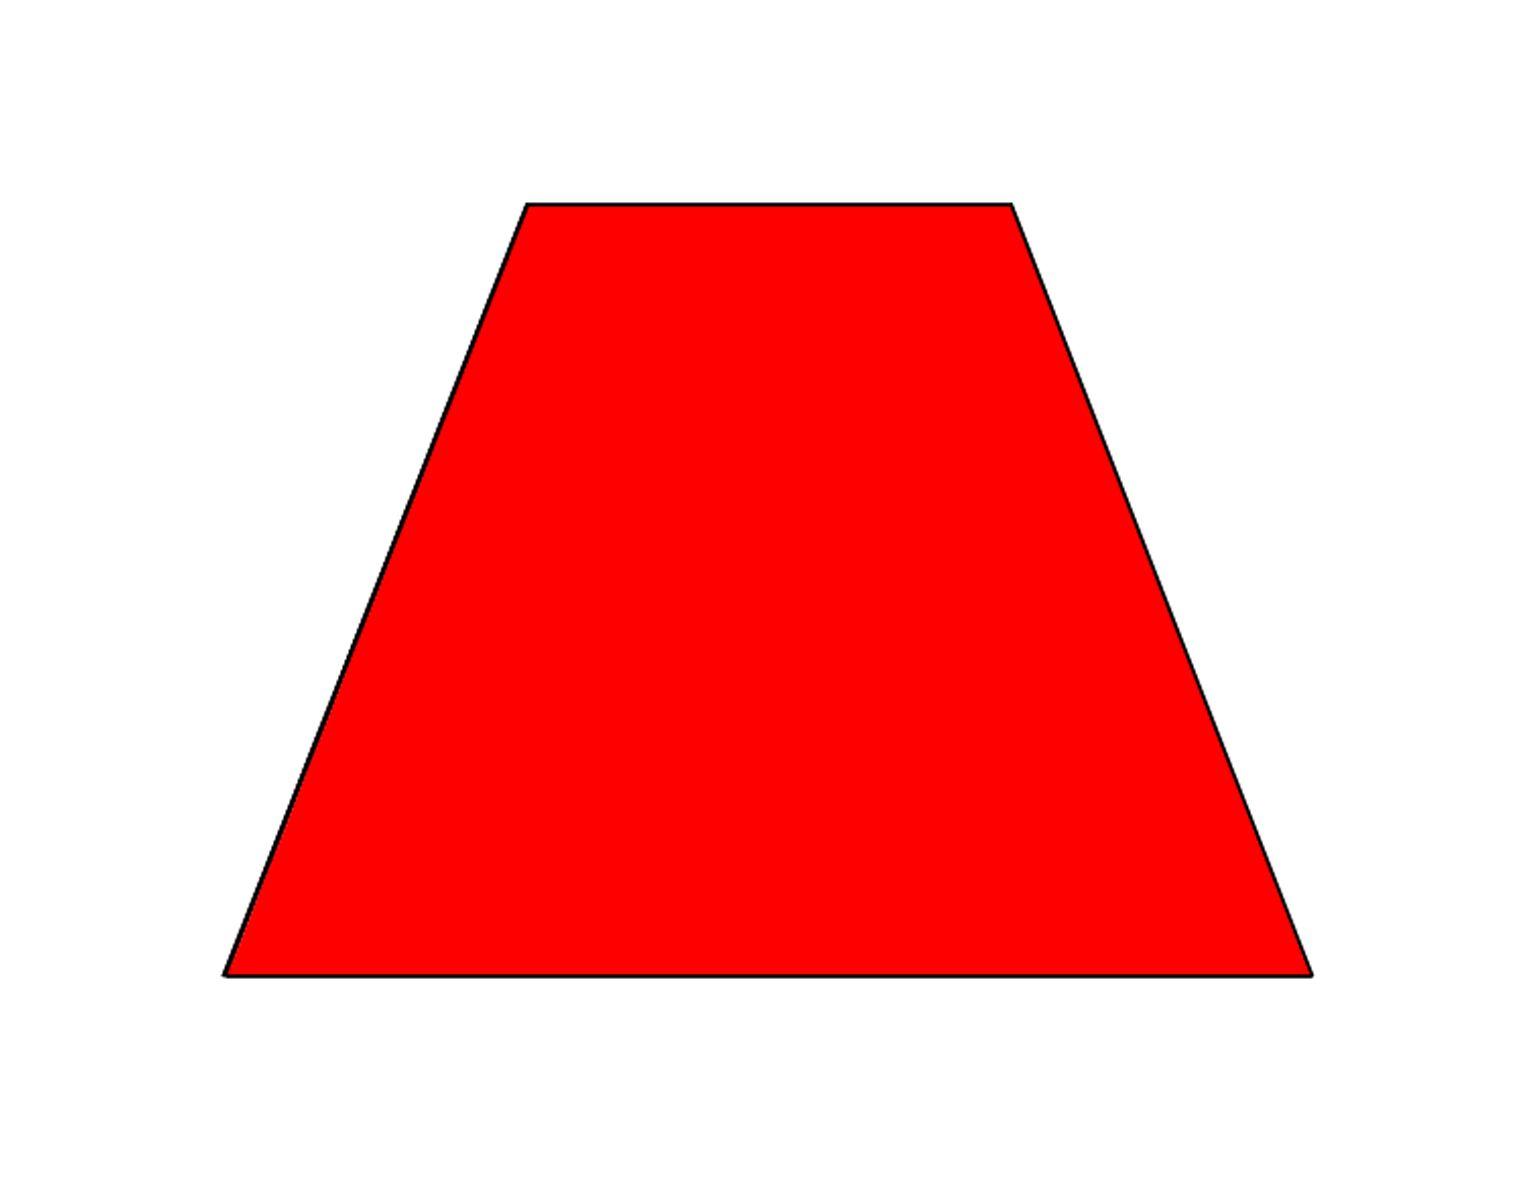 Red Trapezoid Logo - Clara's glog: text, images, music, video | Glogster EDU ...